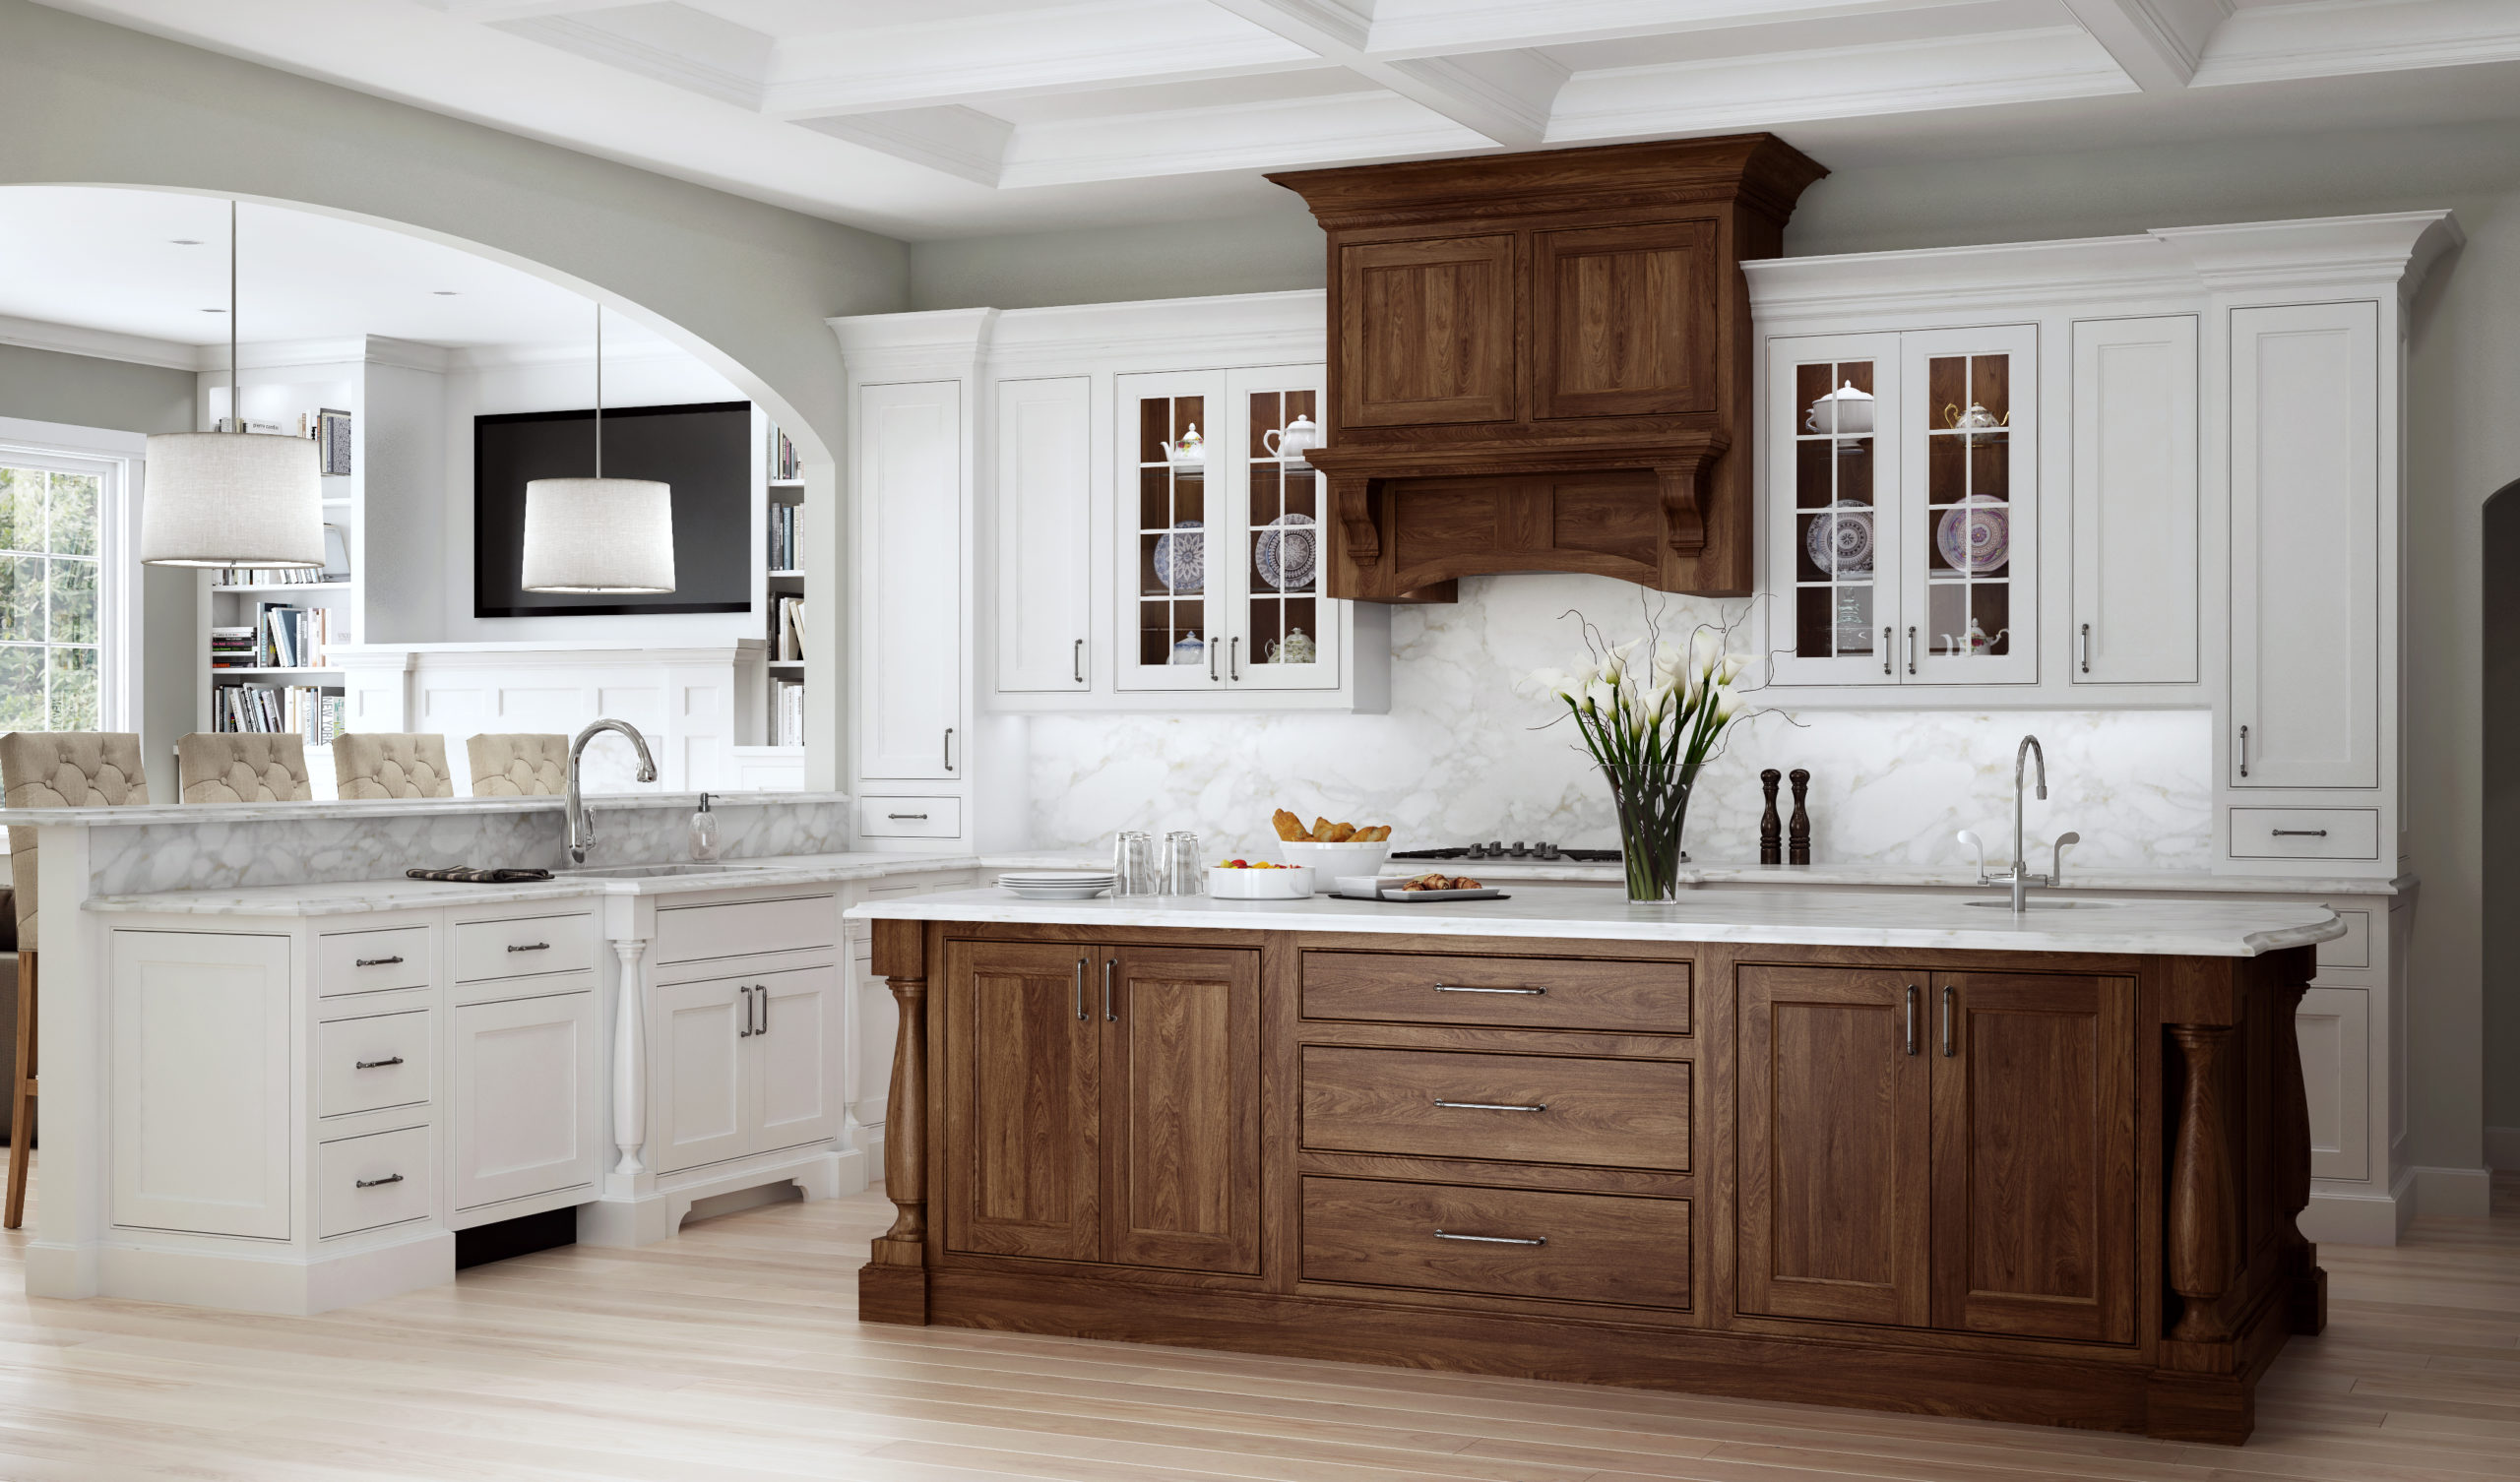 Cary Kitchen Cabinet Design Remodeling Cary Raleigh Chapel Hill Nc